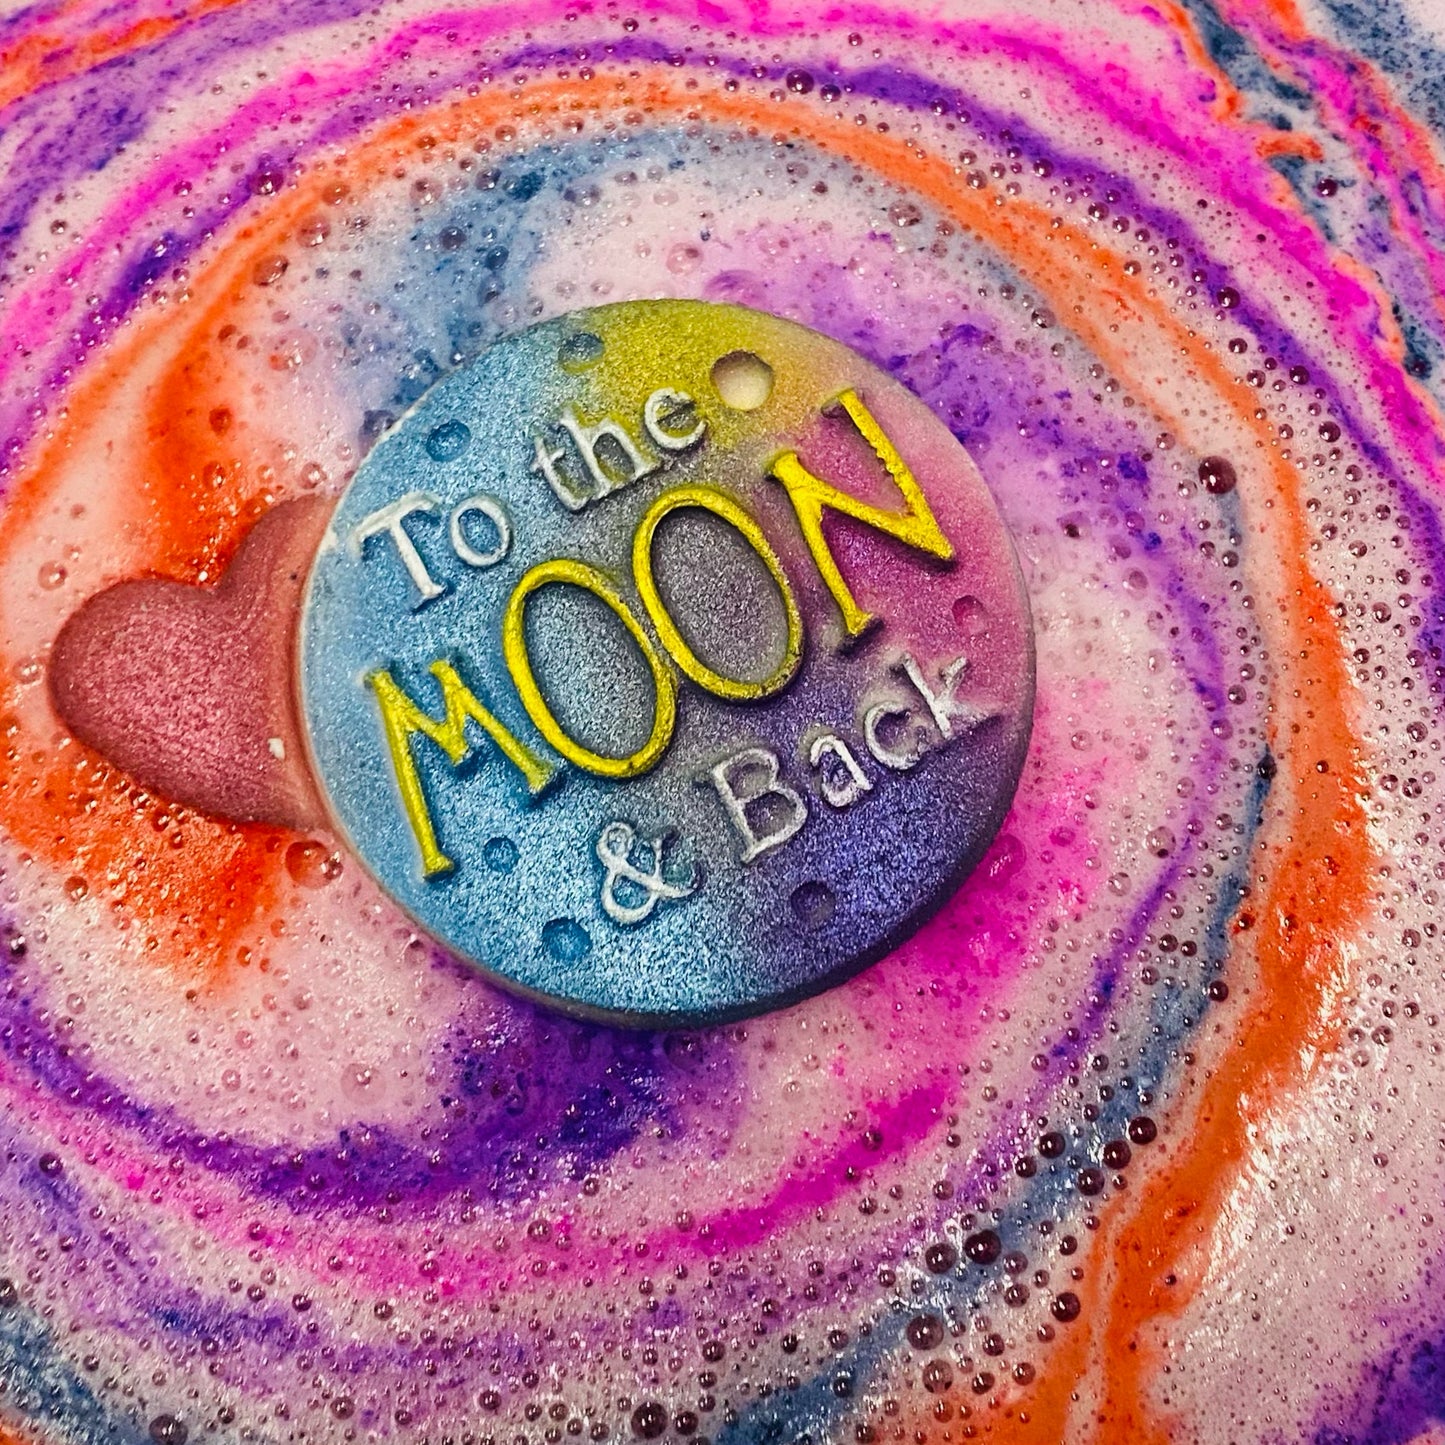 To The Moon & Back Bath Bomb